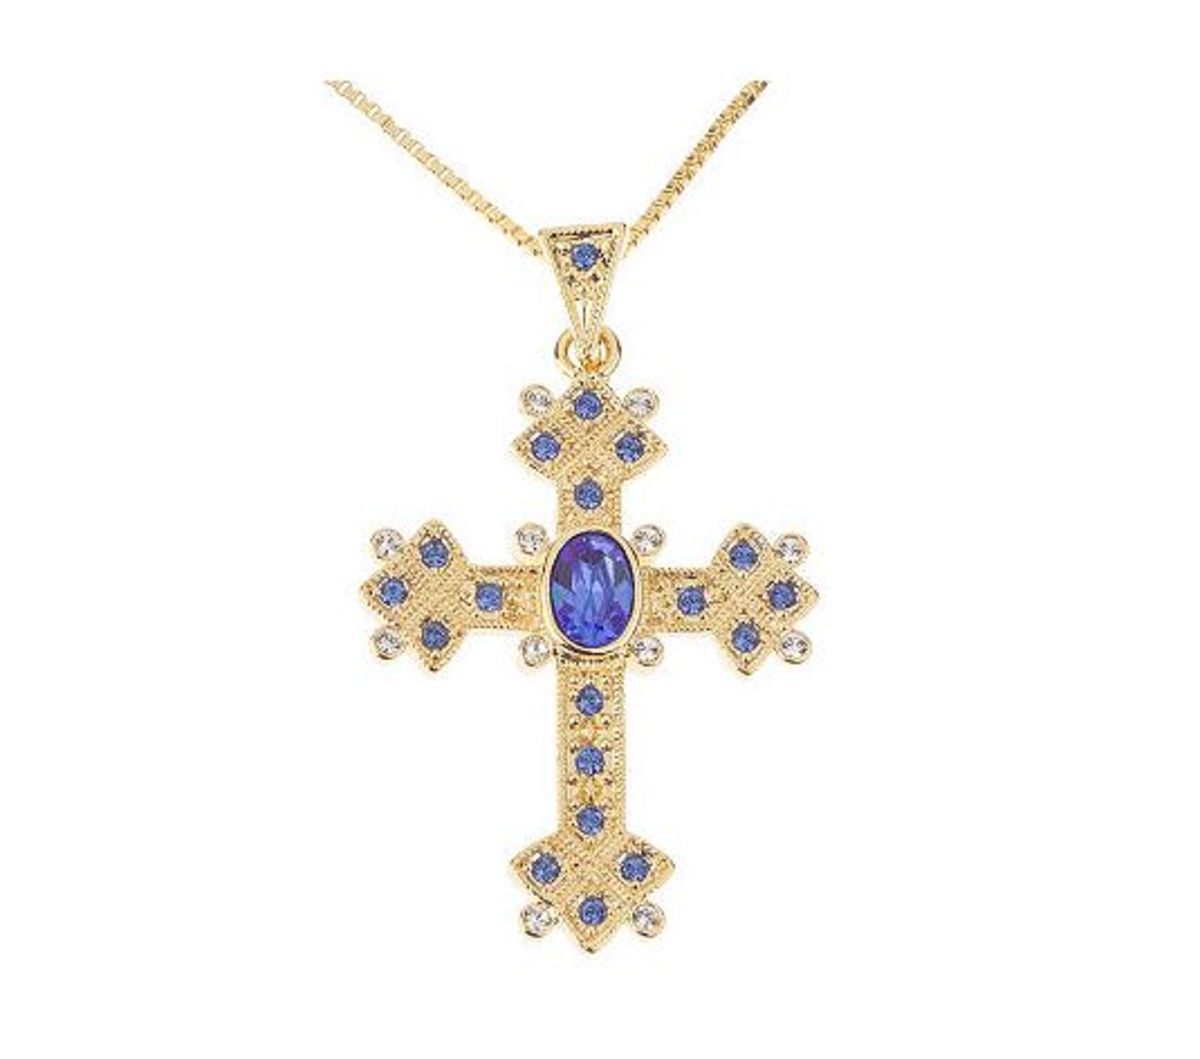 Replica Cross - Photo courtesy of jackiesjewelry.com  A Gift form Queen Mother of England to Jackie Kennedy in memory of JFK 